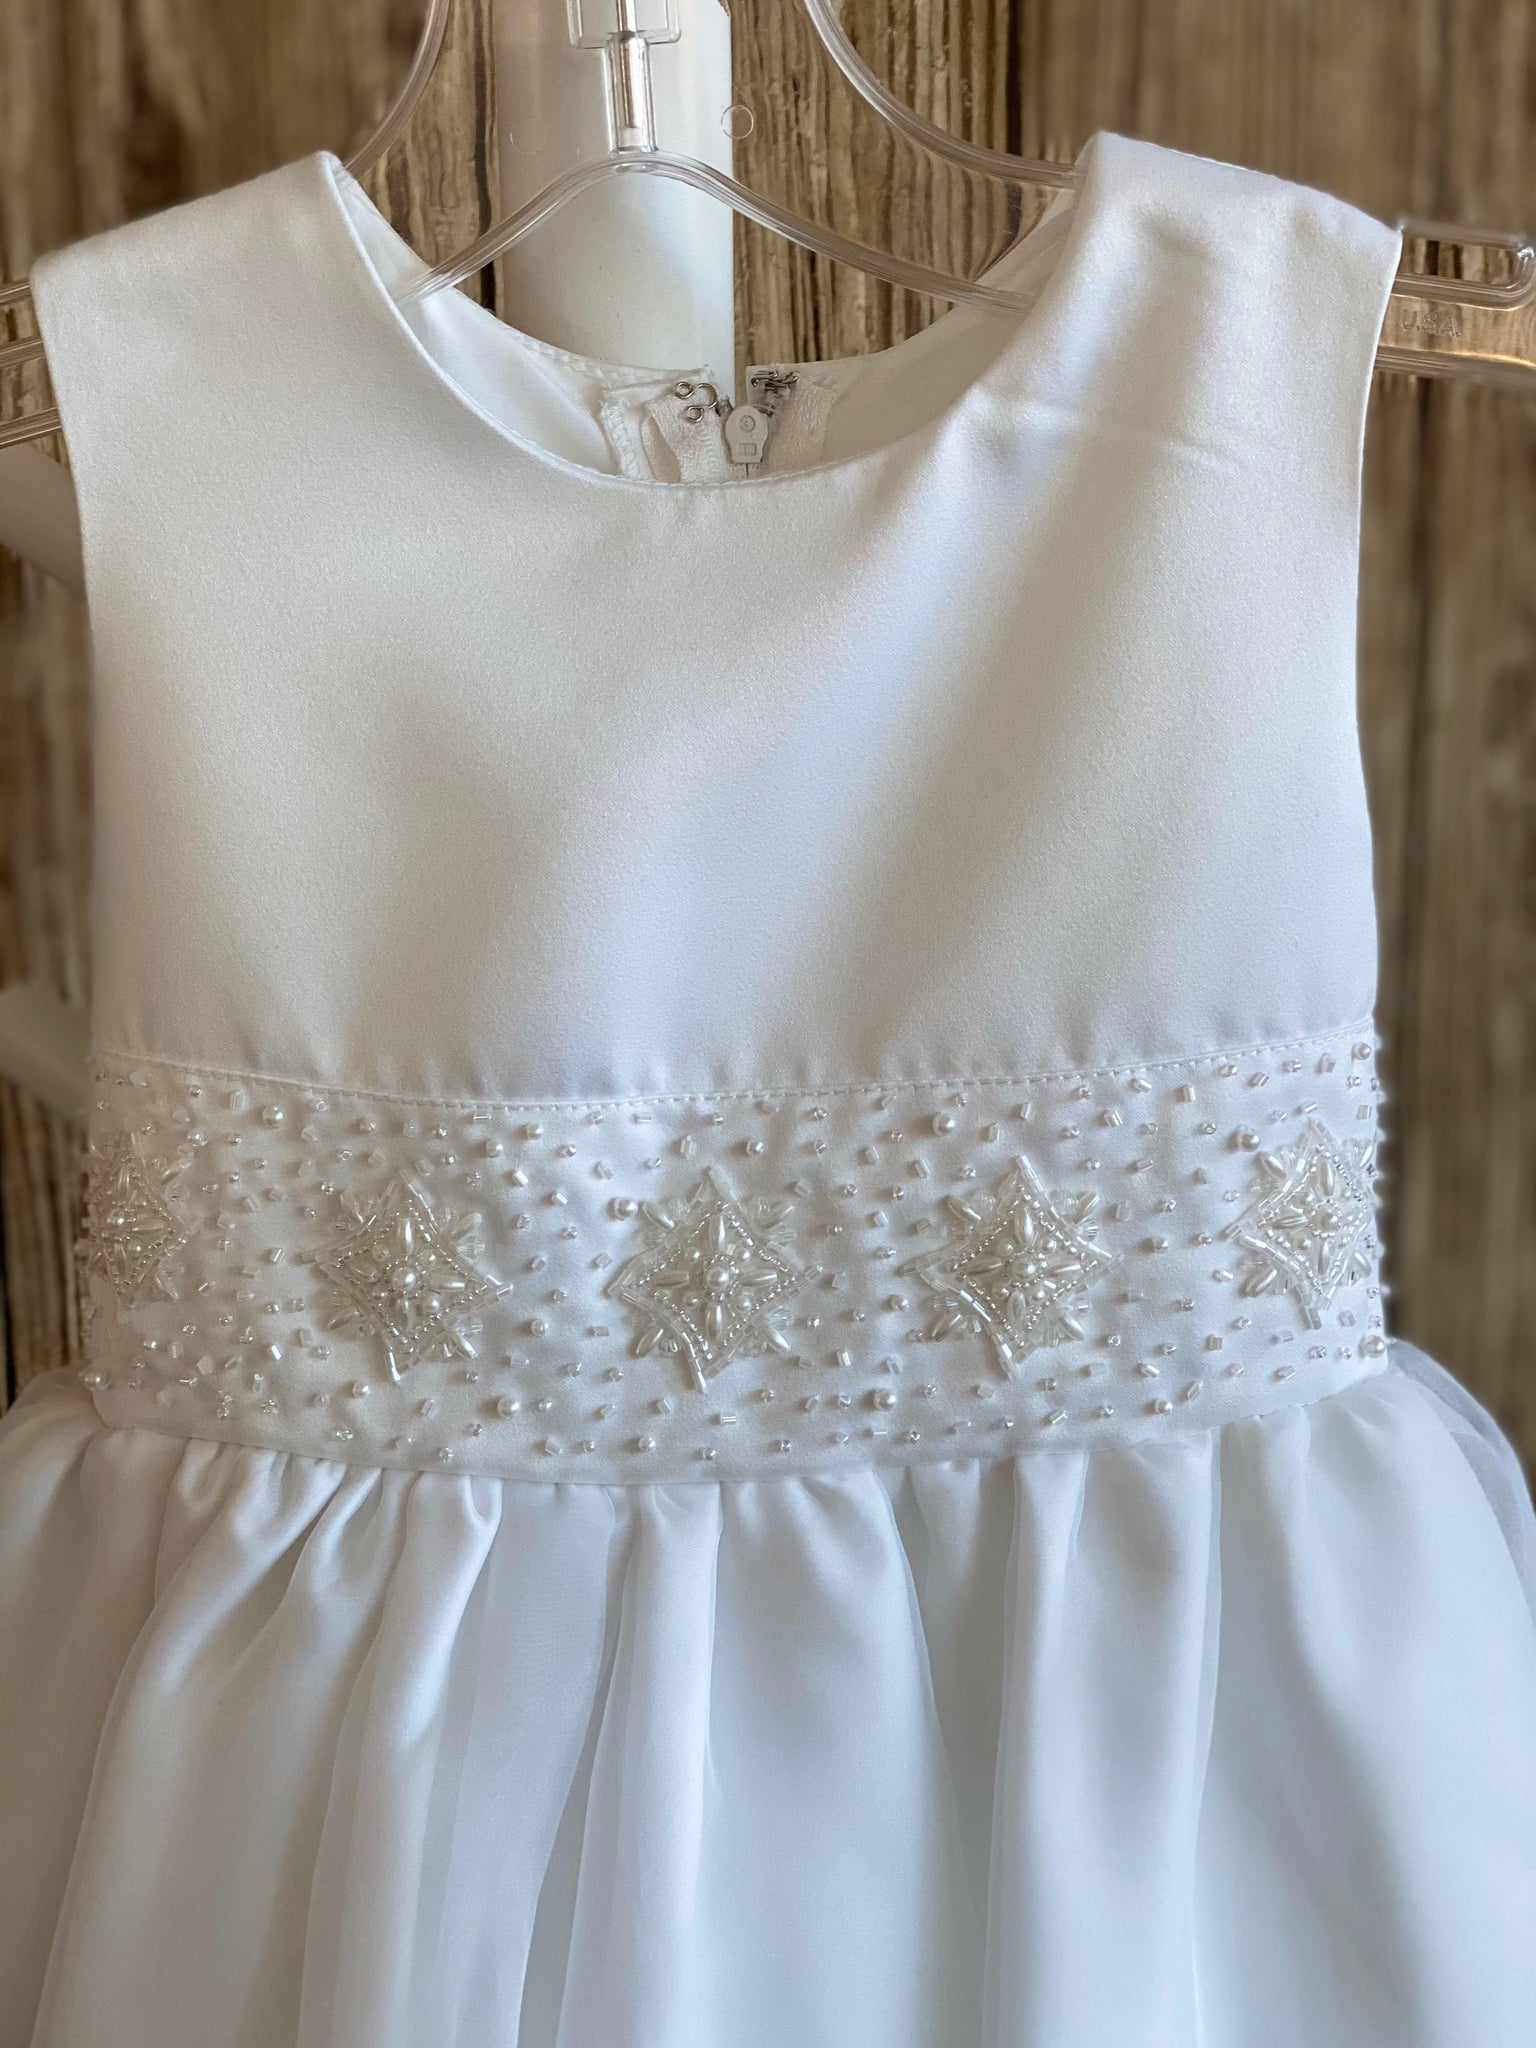 This a beautiful, one-of-a-kind baptism gown.  A lovely gown for a precious child.  White, size 24M Short sleeve Satin bodice with beaded detailing along bottom Satin skirting with mesh overlay Zipper closure